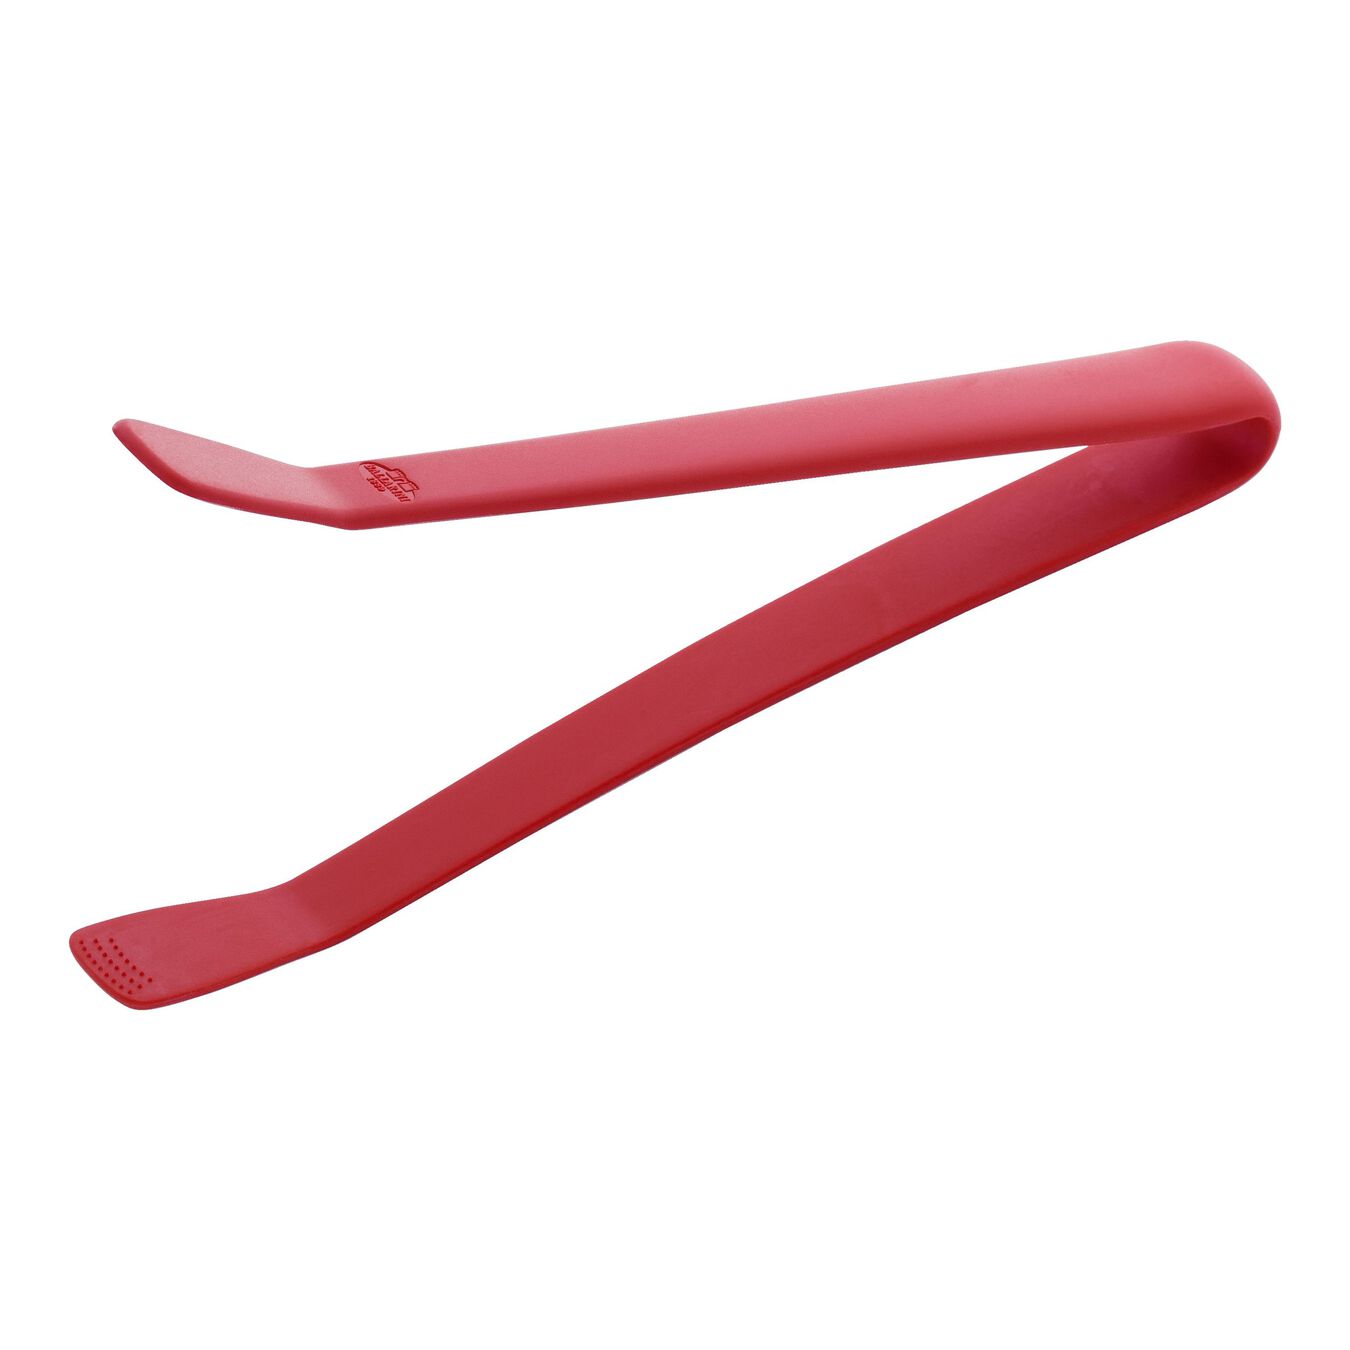 27 cm silicone Tongs, red,,large 1